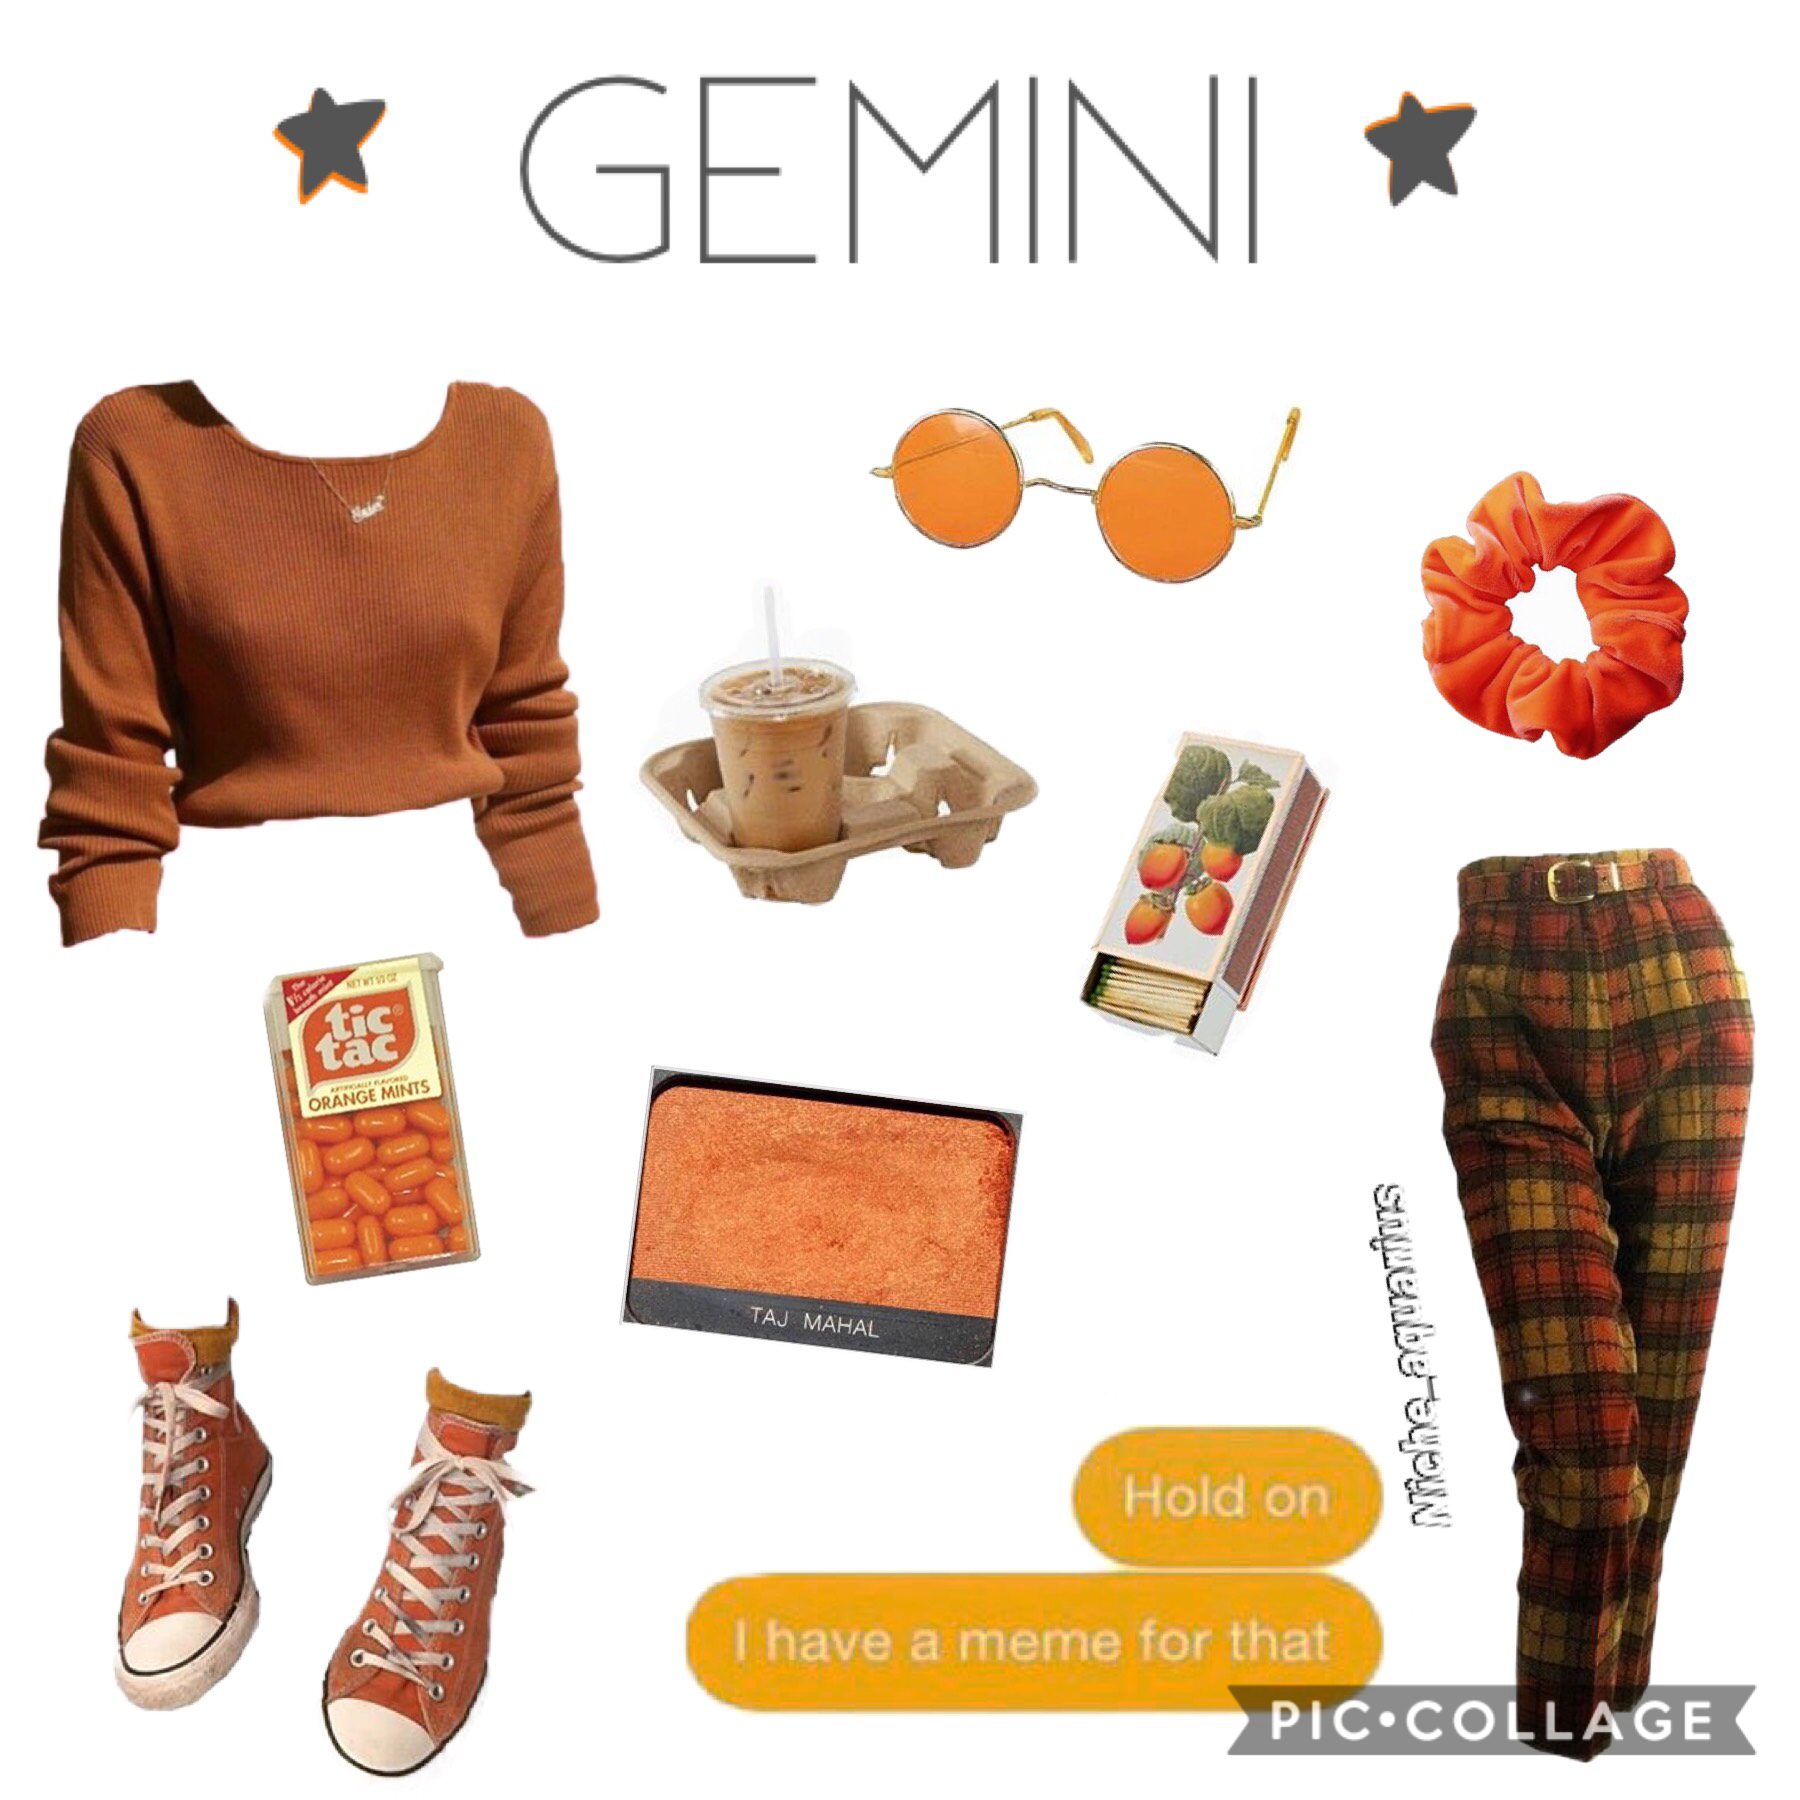 🧡Tap🧡

So I reposted this cos I realised that the star on top was orange instead of dark grey so yeah sorry about that😂